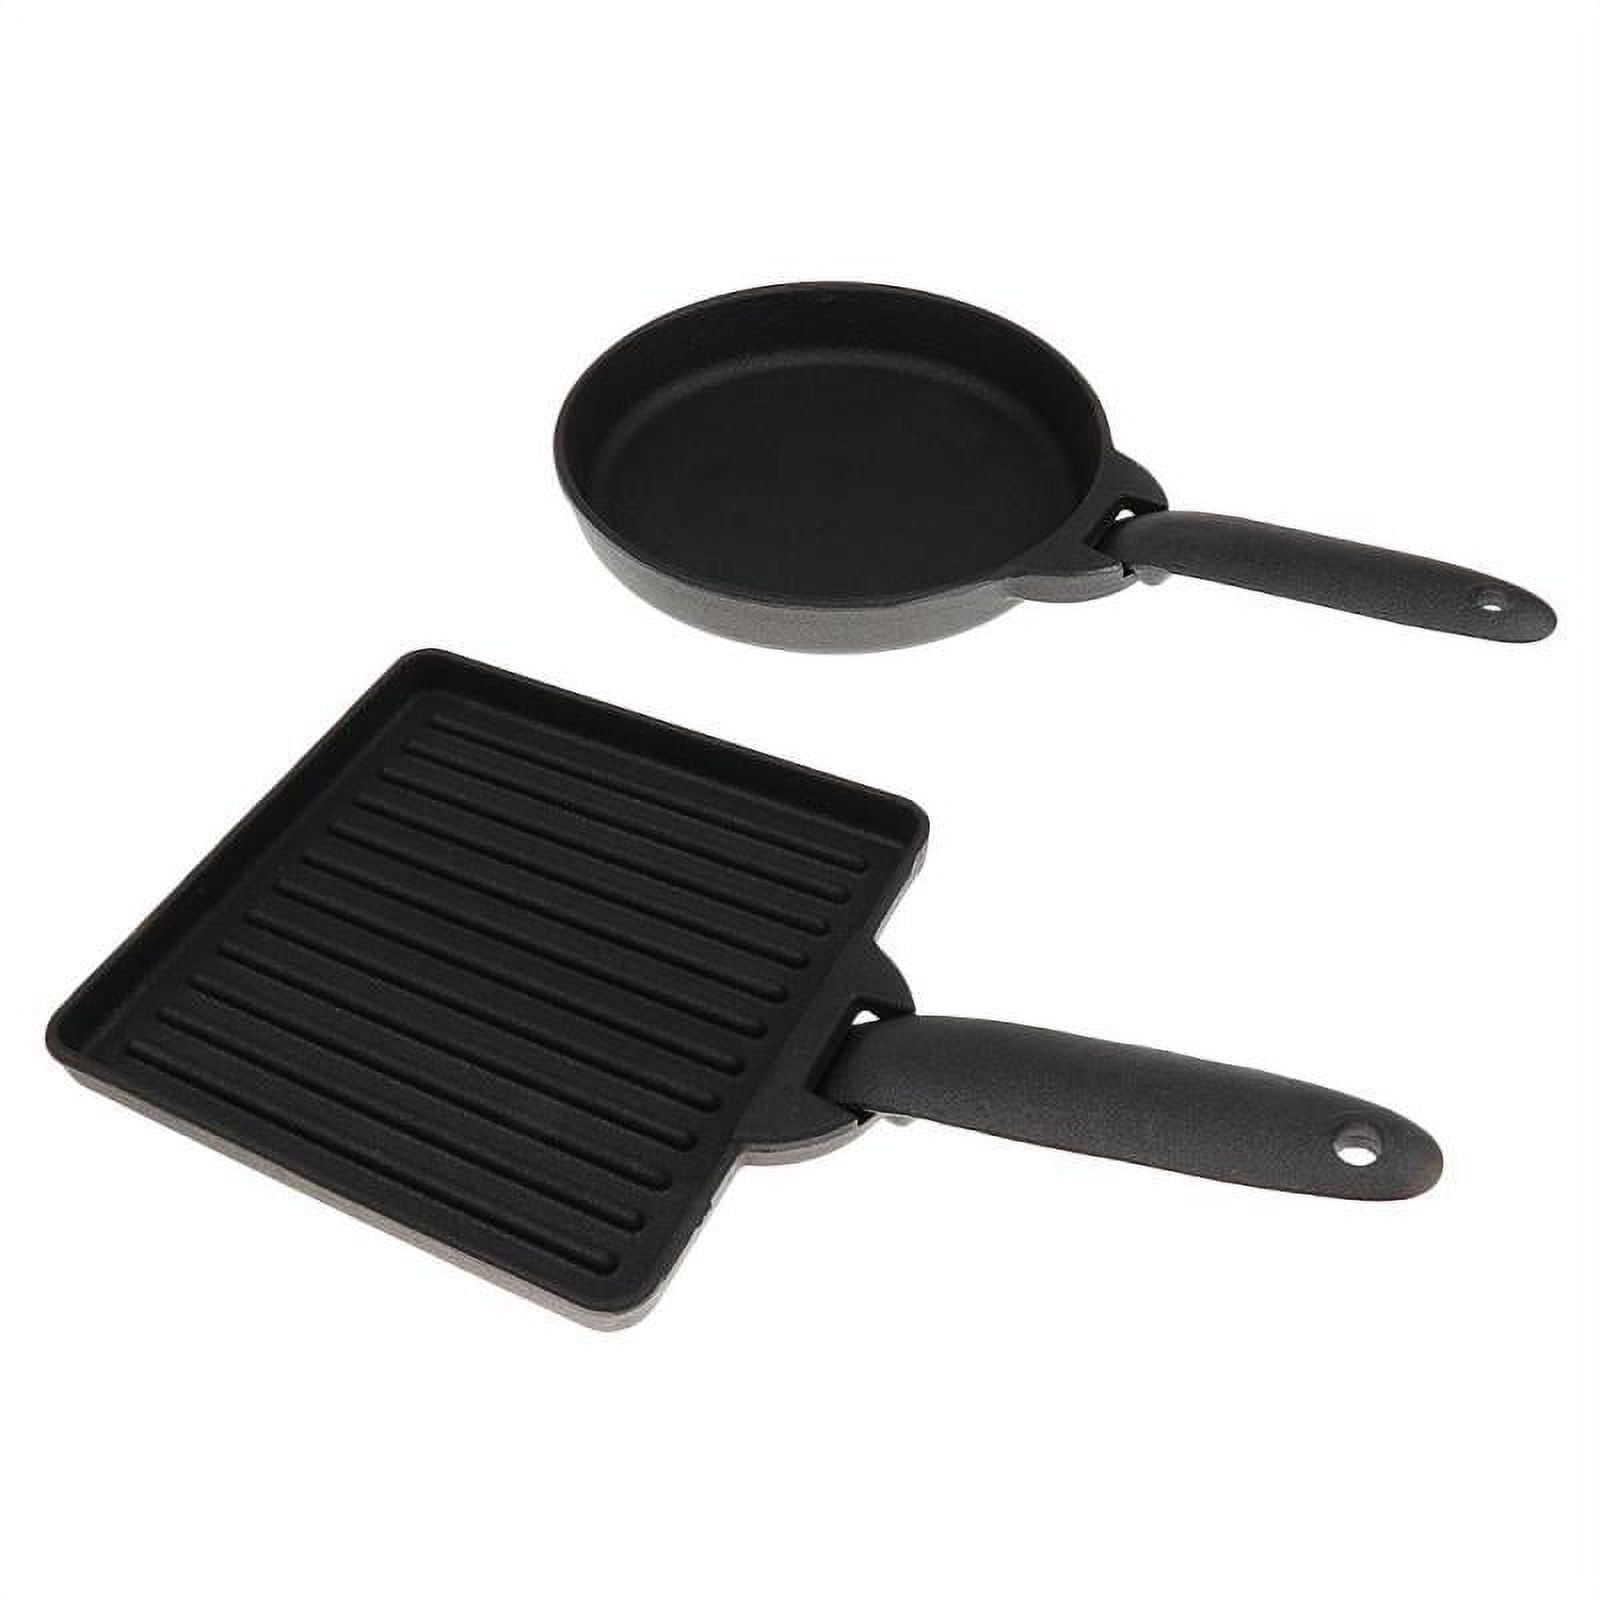 2pcs Small Portable Cast Iron Camping Steak Frying Pan Detachable Skillets  + Carry Case Outdoor Barbecue Grill